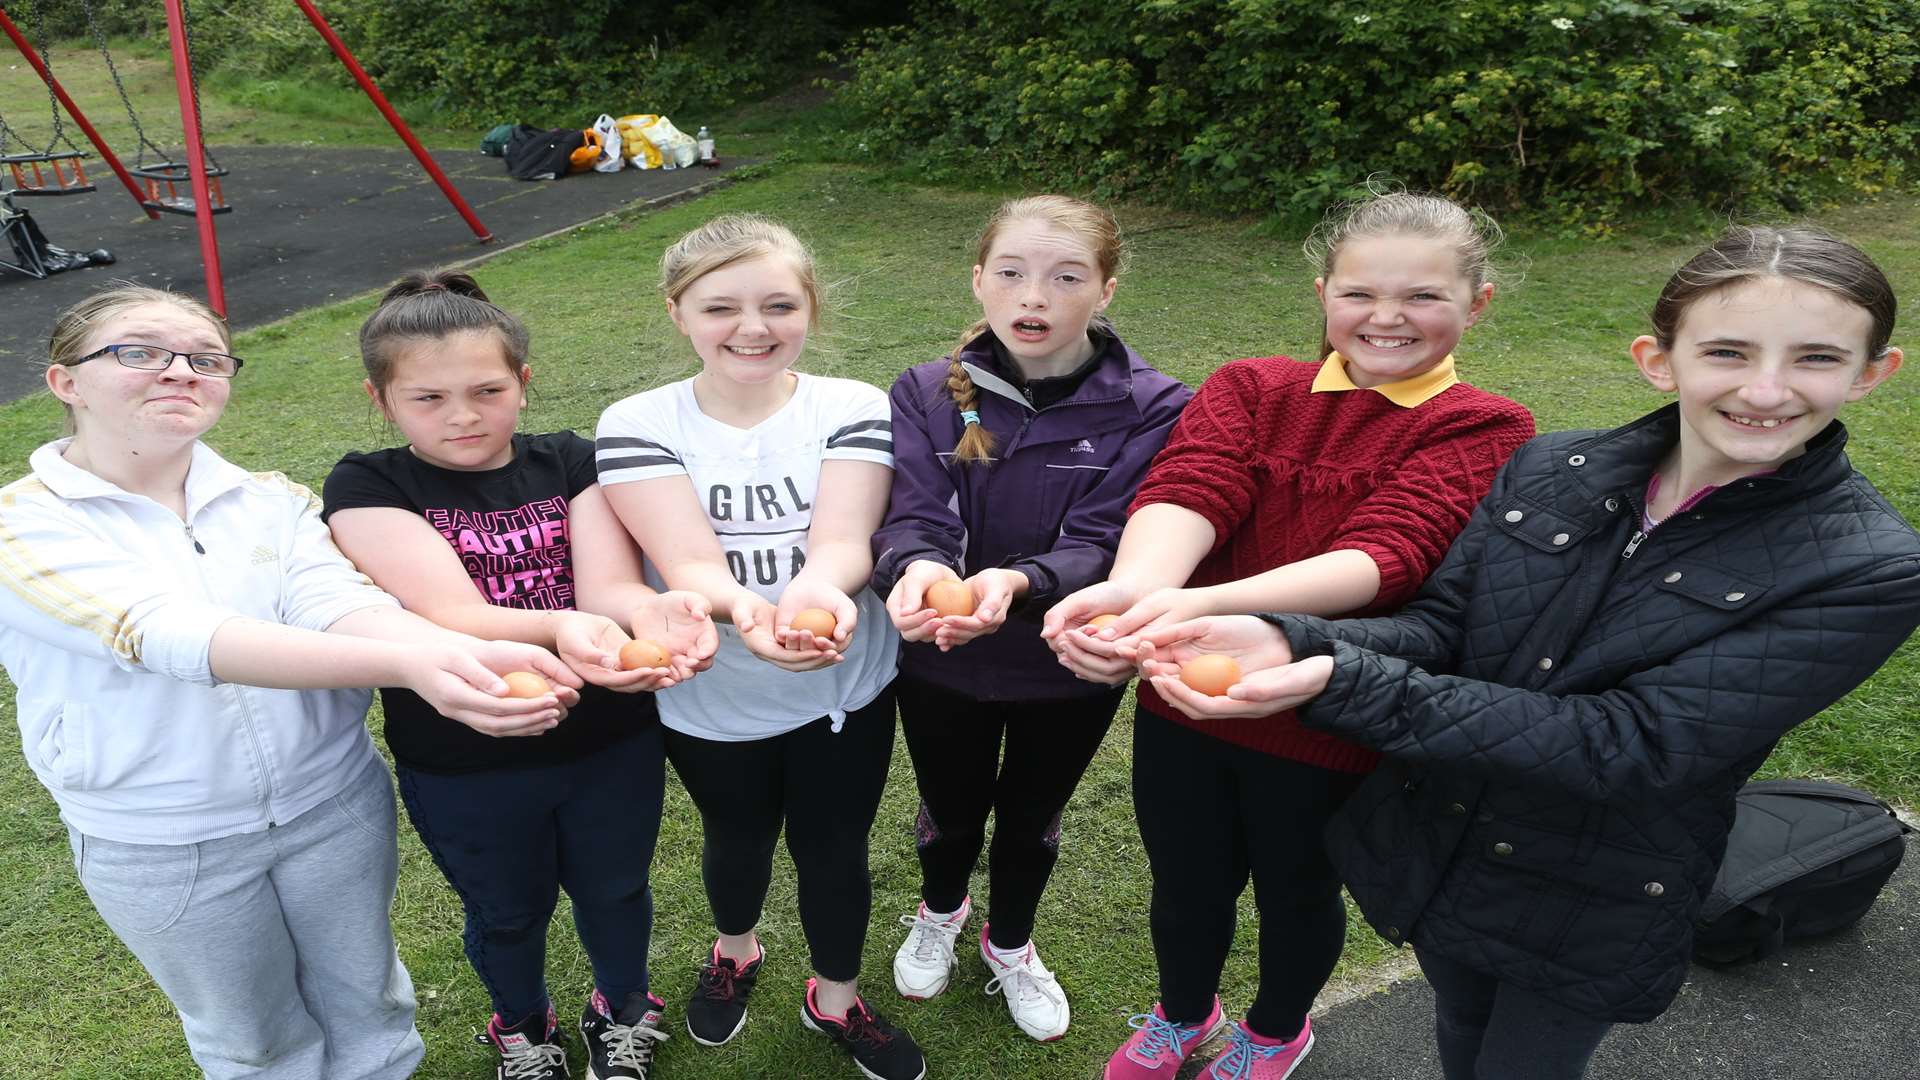 Girls from 1st Sheppey Guides get eggs for a badge collecting at The Glen in Minster